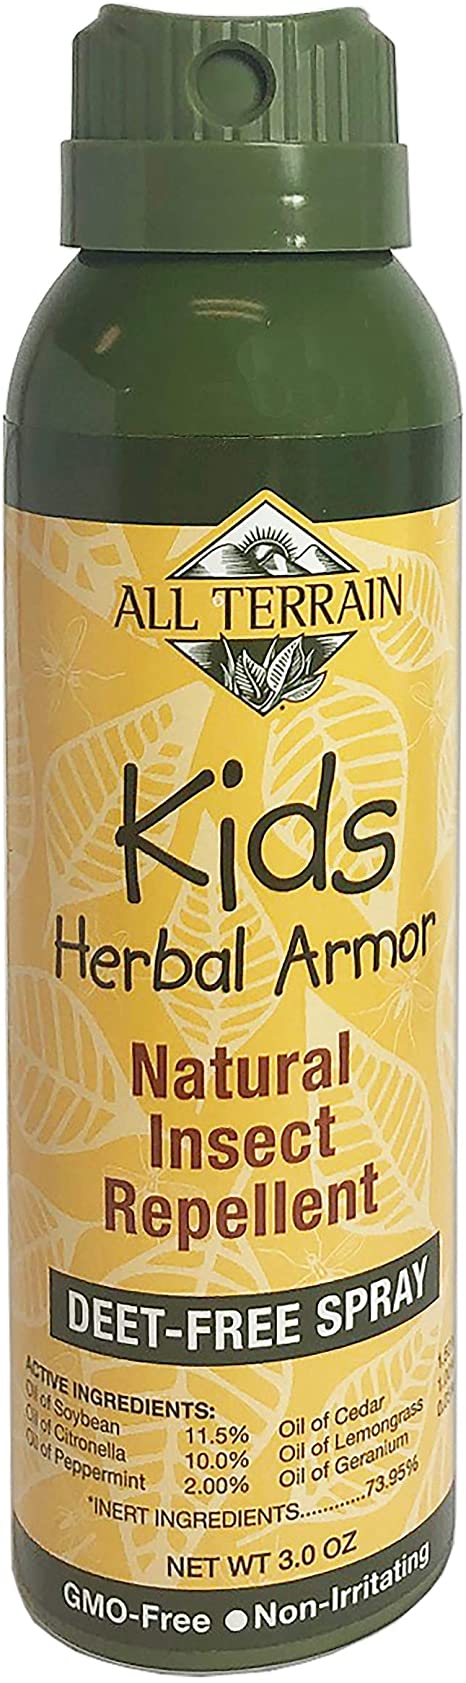 All Terrain Kids Herbal Armor Natural Insect Repellent, DEET-Free Spray, 3 Ounce